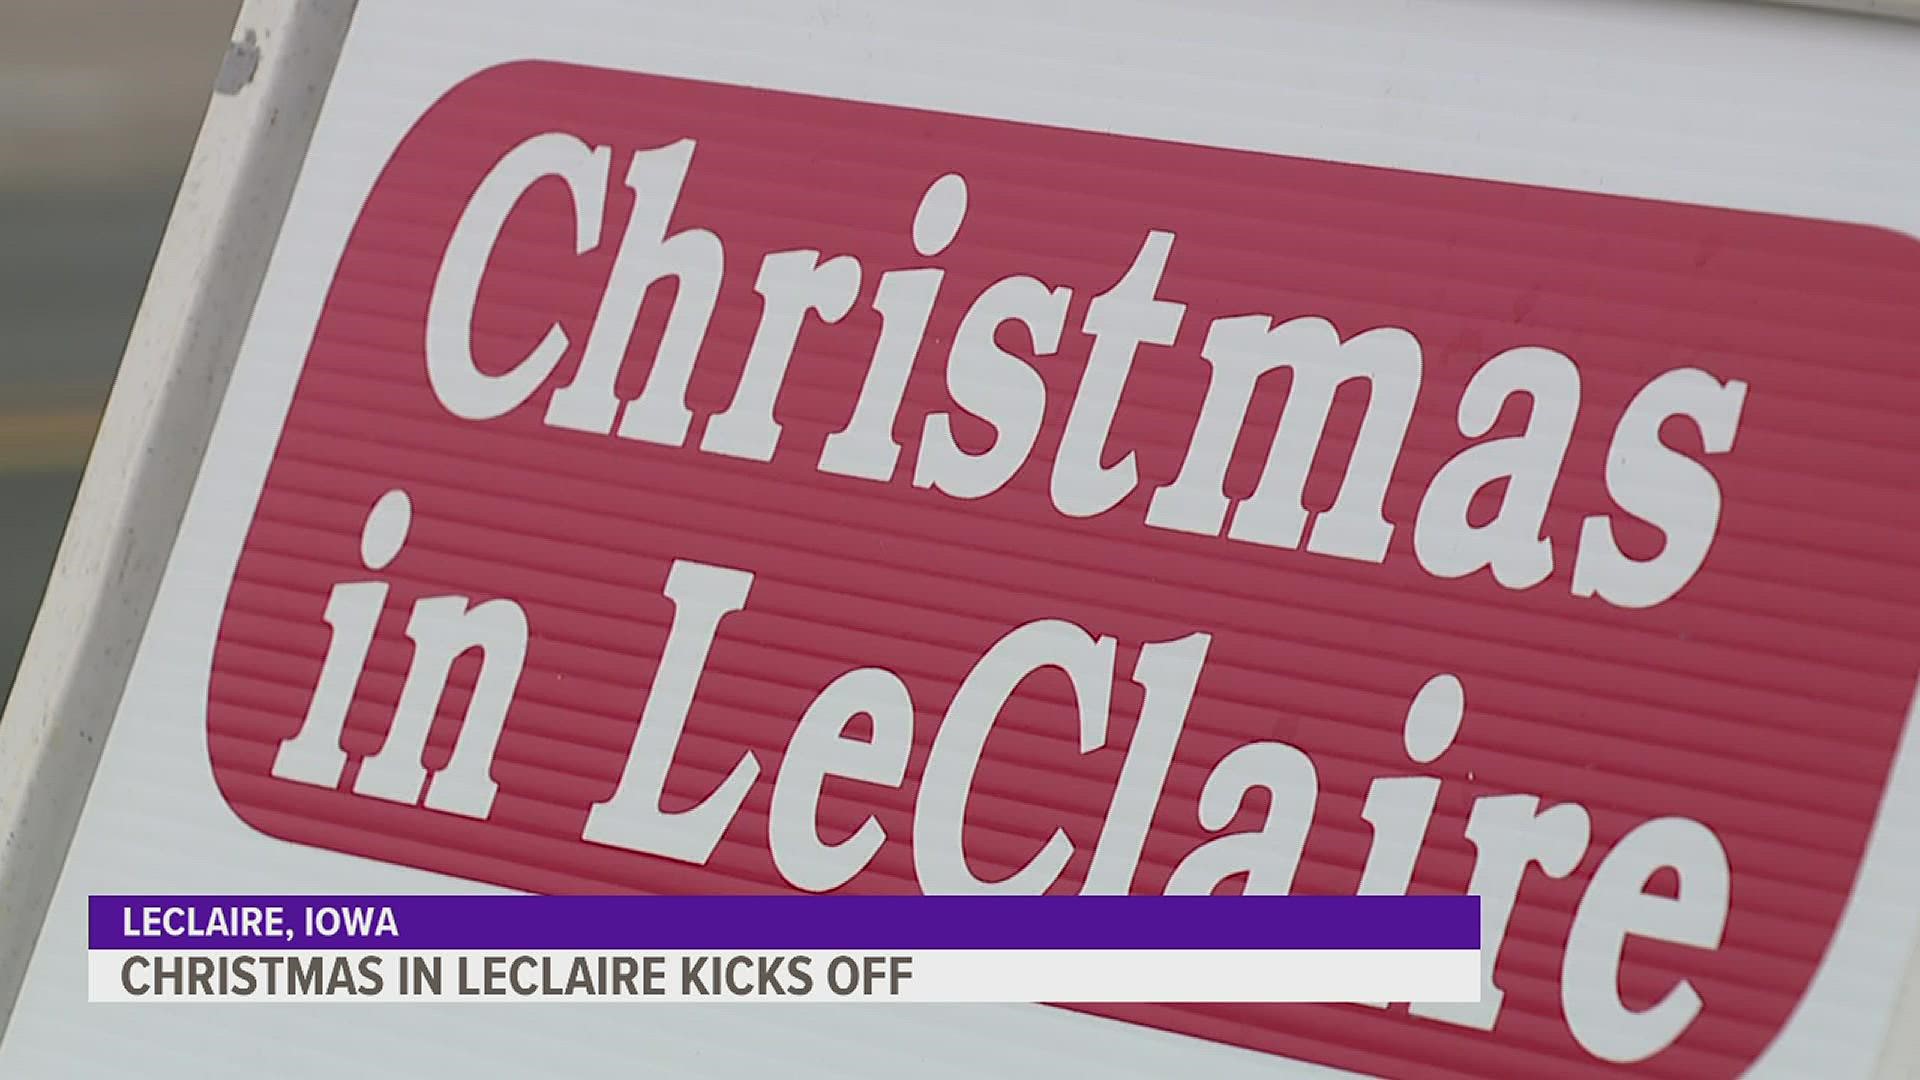 A 6 p.m., LeClaire's Christmas tree will alight, kicking off the holiday season with crafts, baked goods and silent auctions.